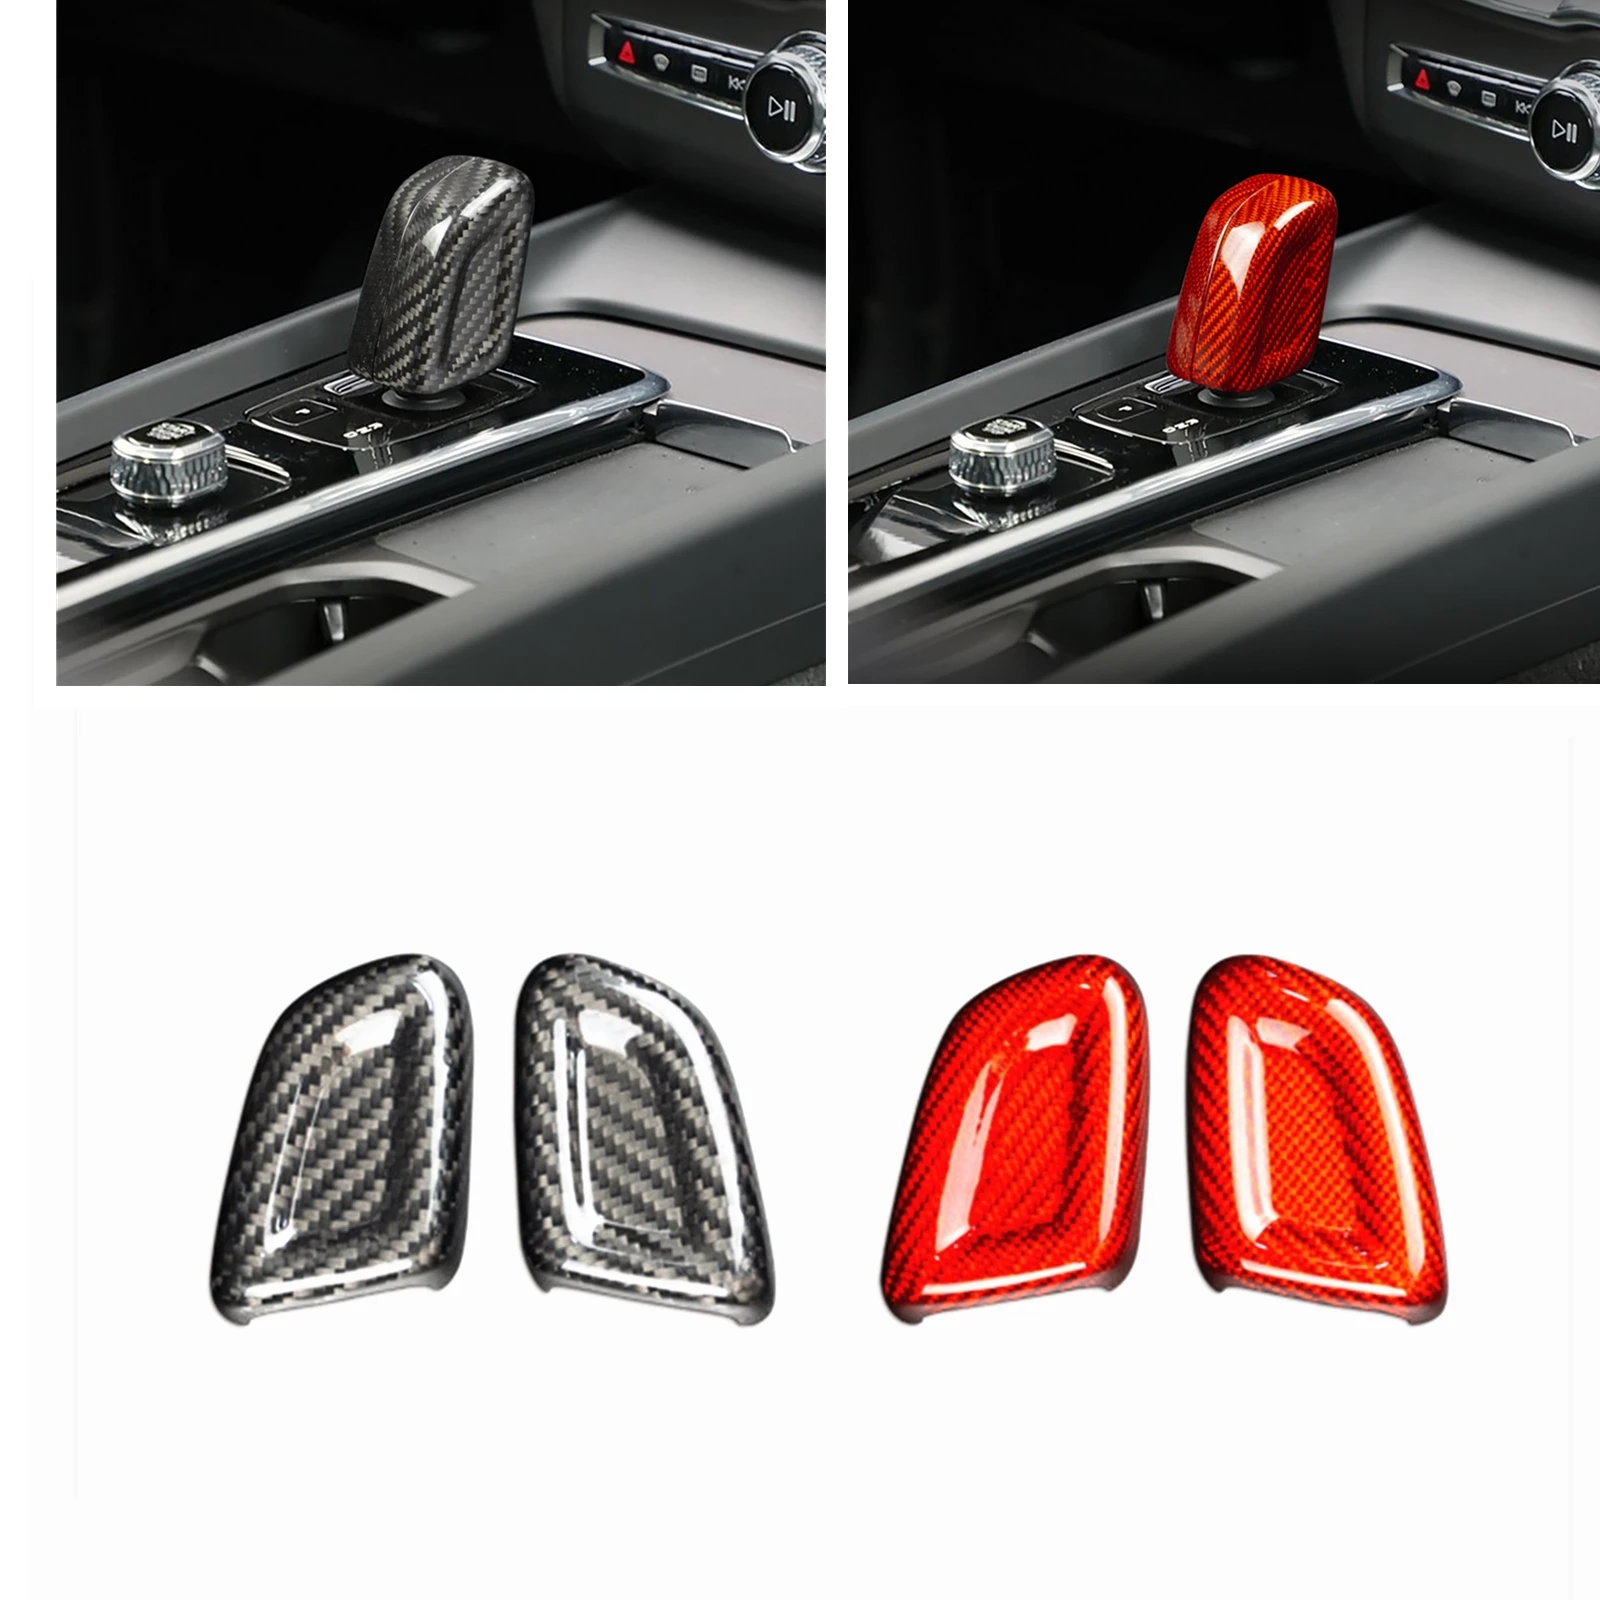 

For Volvo XC40 S60 XC60 V90 2020-2022 Real Carbon Fiber Gear Shift Knob Head Cover Trim Black/Red Shifter Handle Case Cap Shell